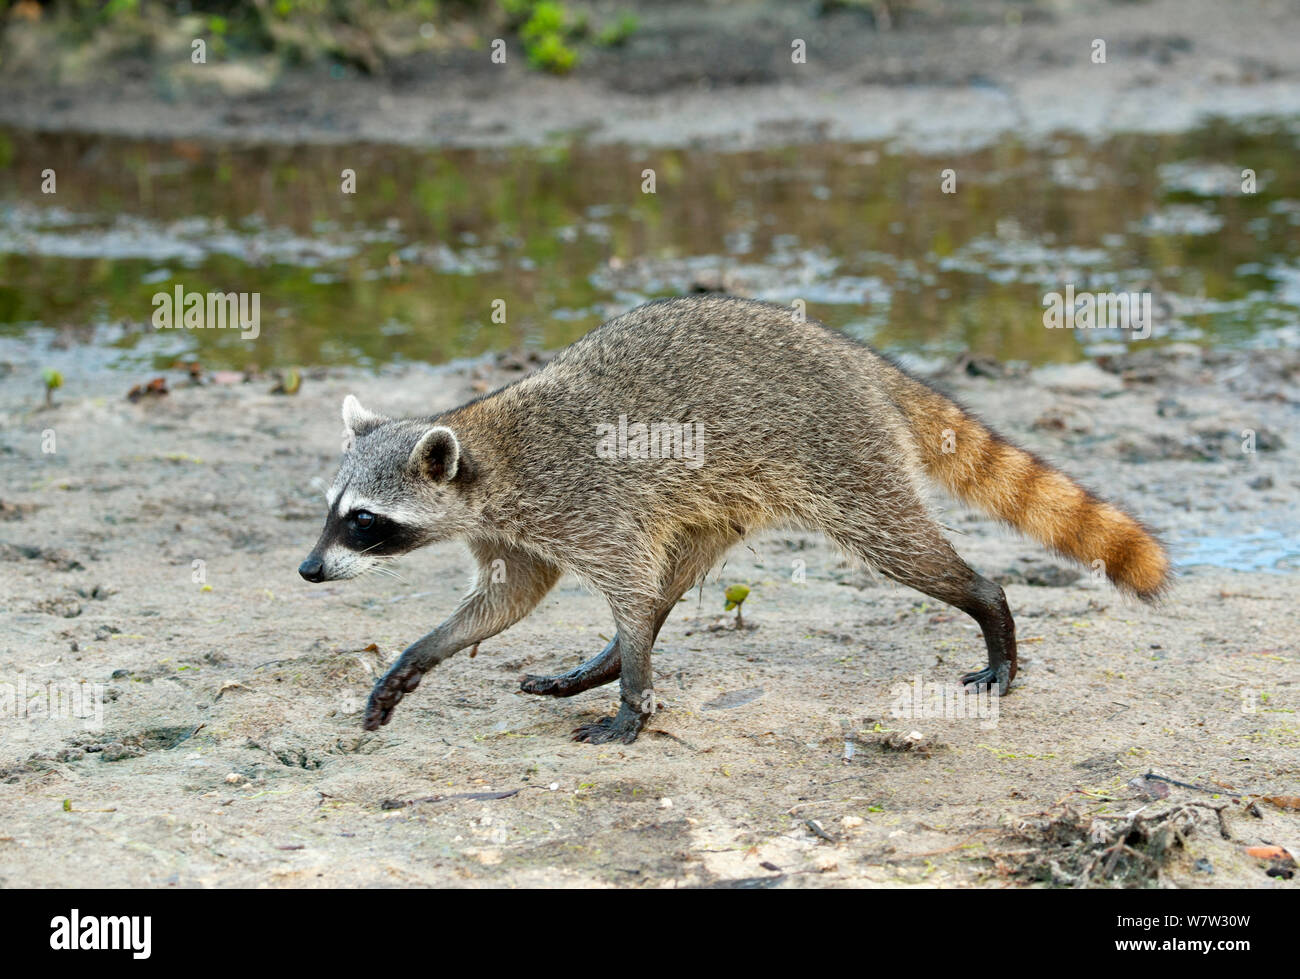 Pygmy Raccoon (Procyon pygmaeus) walking along coast, Cozumel Island, Mexico. Critcally endangered species with less than 500 in existence. Stock Photo